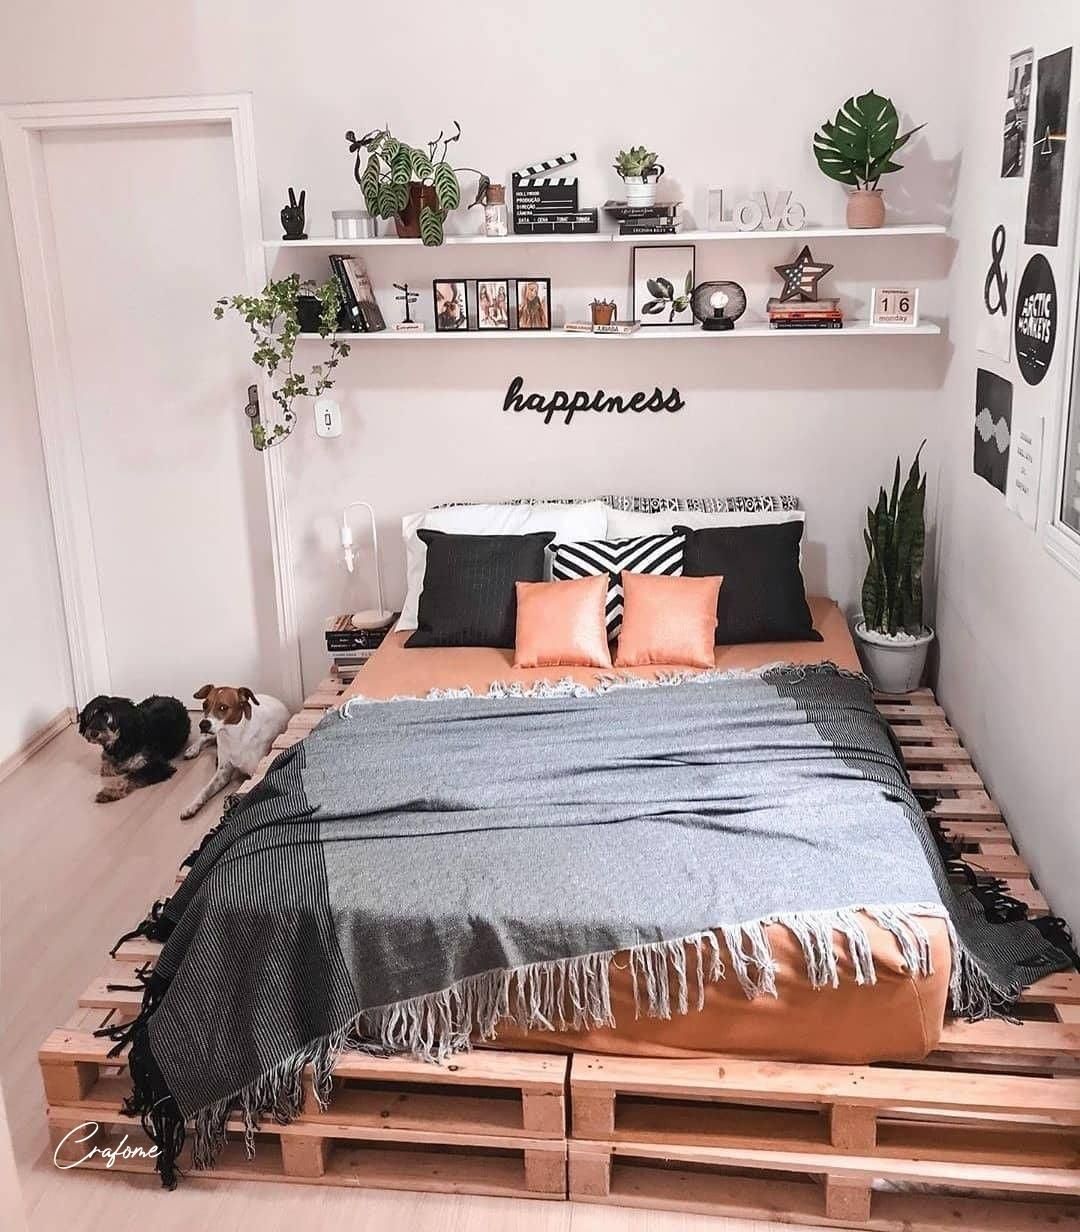 50+ Adorable Pallet Bed Ideas You Will Love - Crafome - 50+ Adorable Pallet Bed Ideas You Will Love - Crafome -   23 room decor for teens ideas